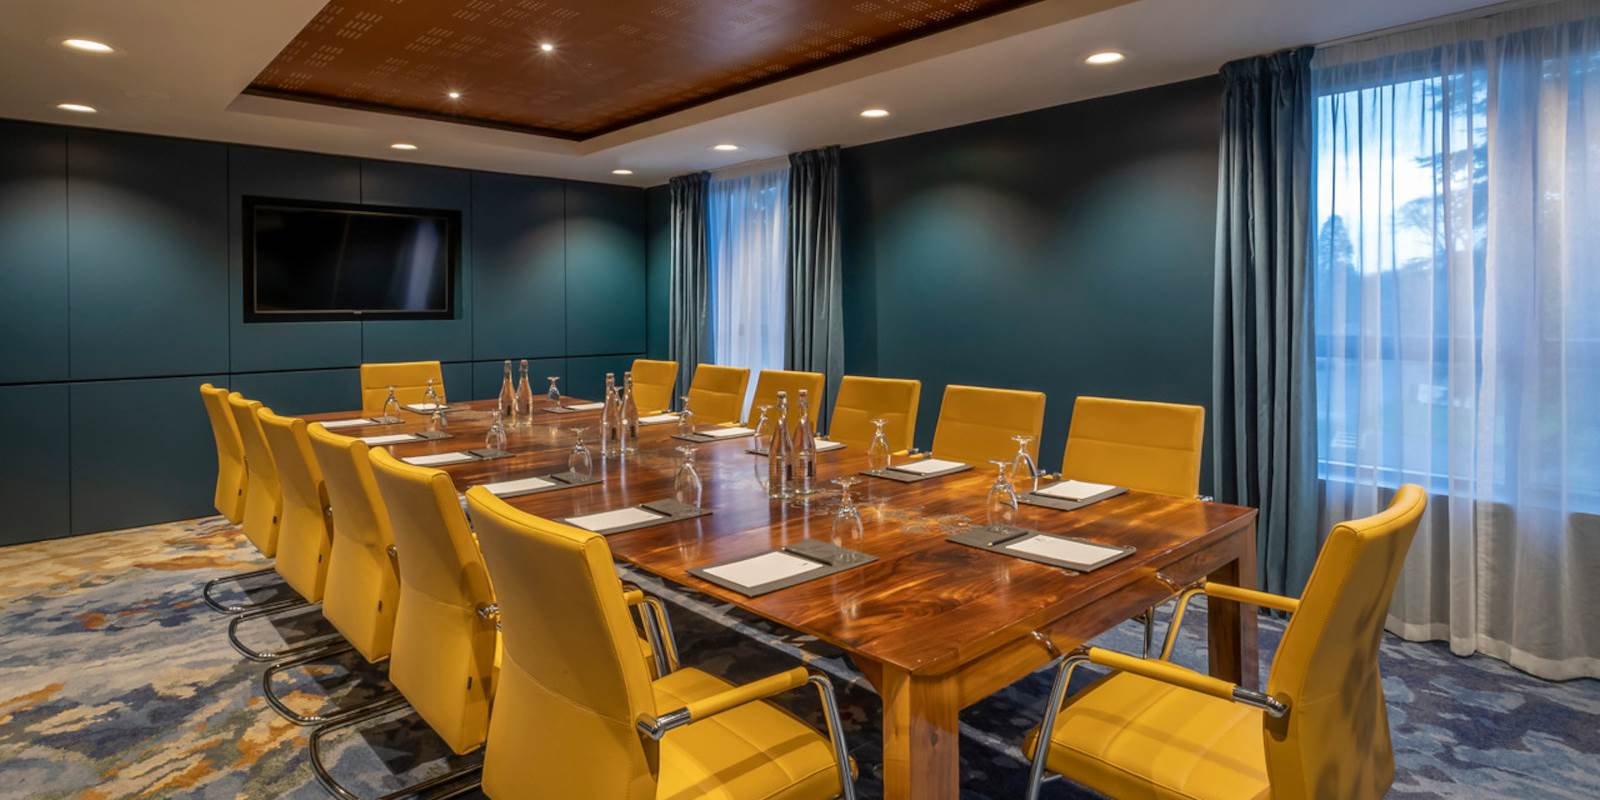 Leinster Boardroom at luxury 5 star hotel in Carton House, Kildare